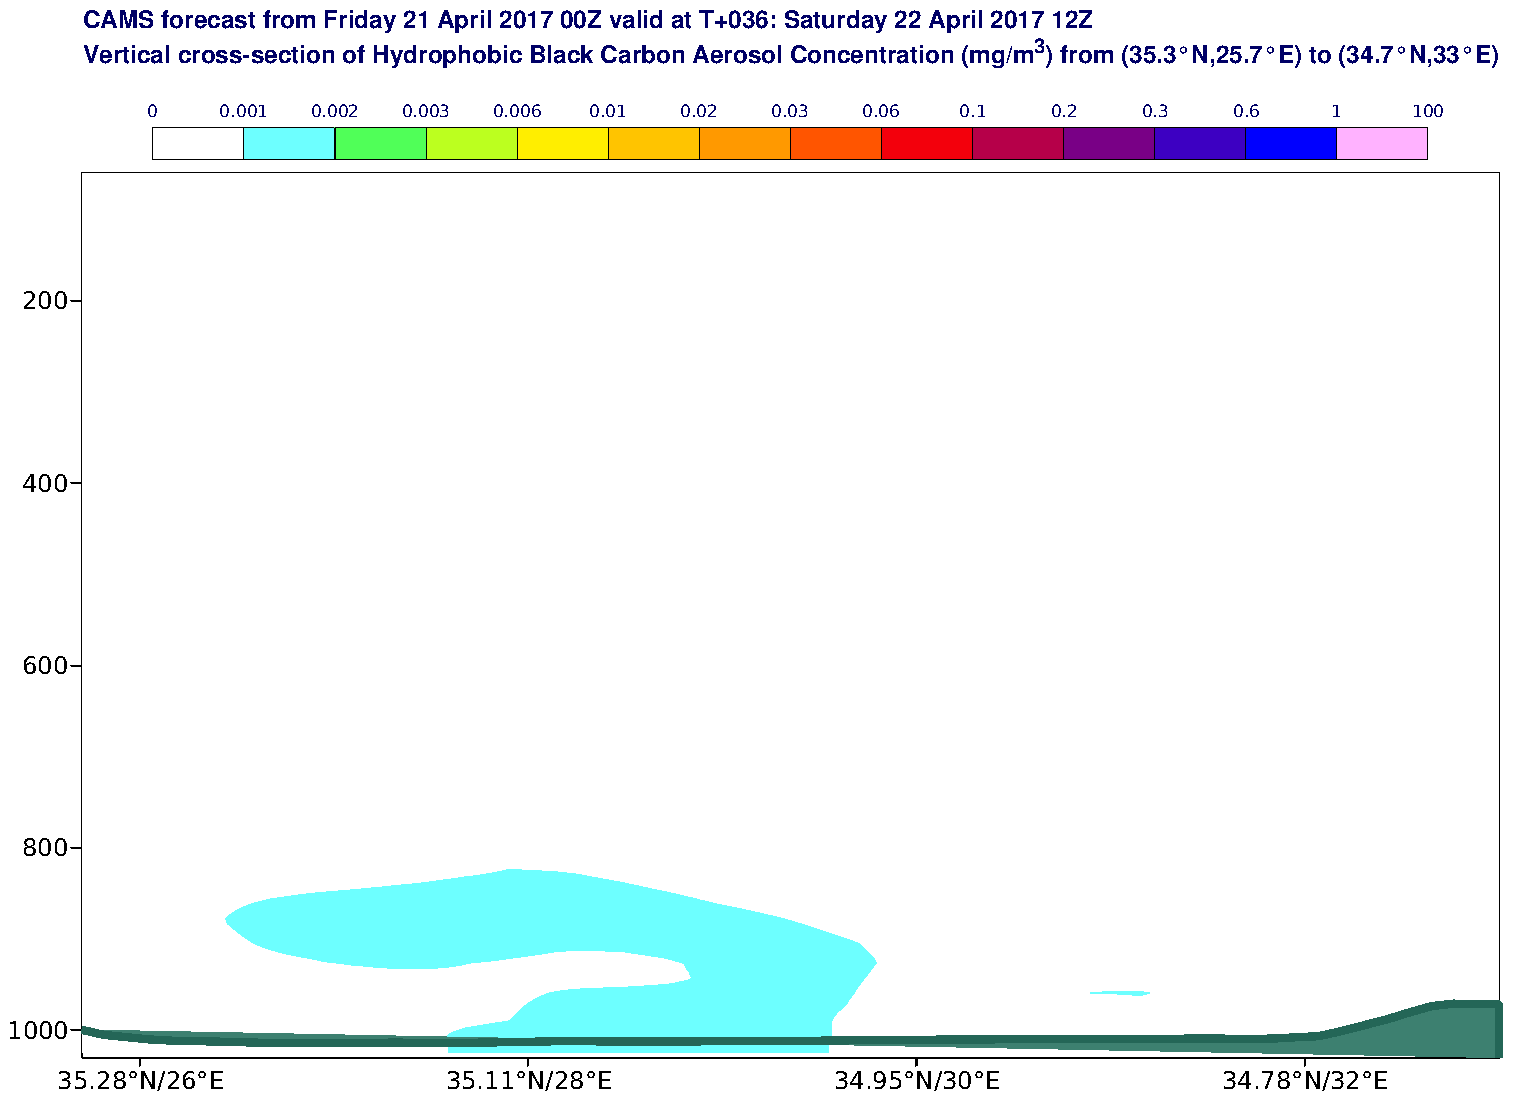 Vertical cross-section of Hydrophobic Black Carbon Aerosol Concentration (mg/m3) valid at T36 - 2017-04-22 12:00